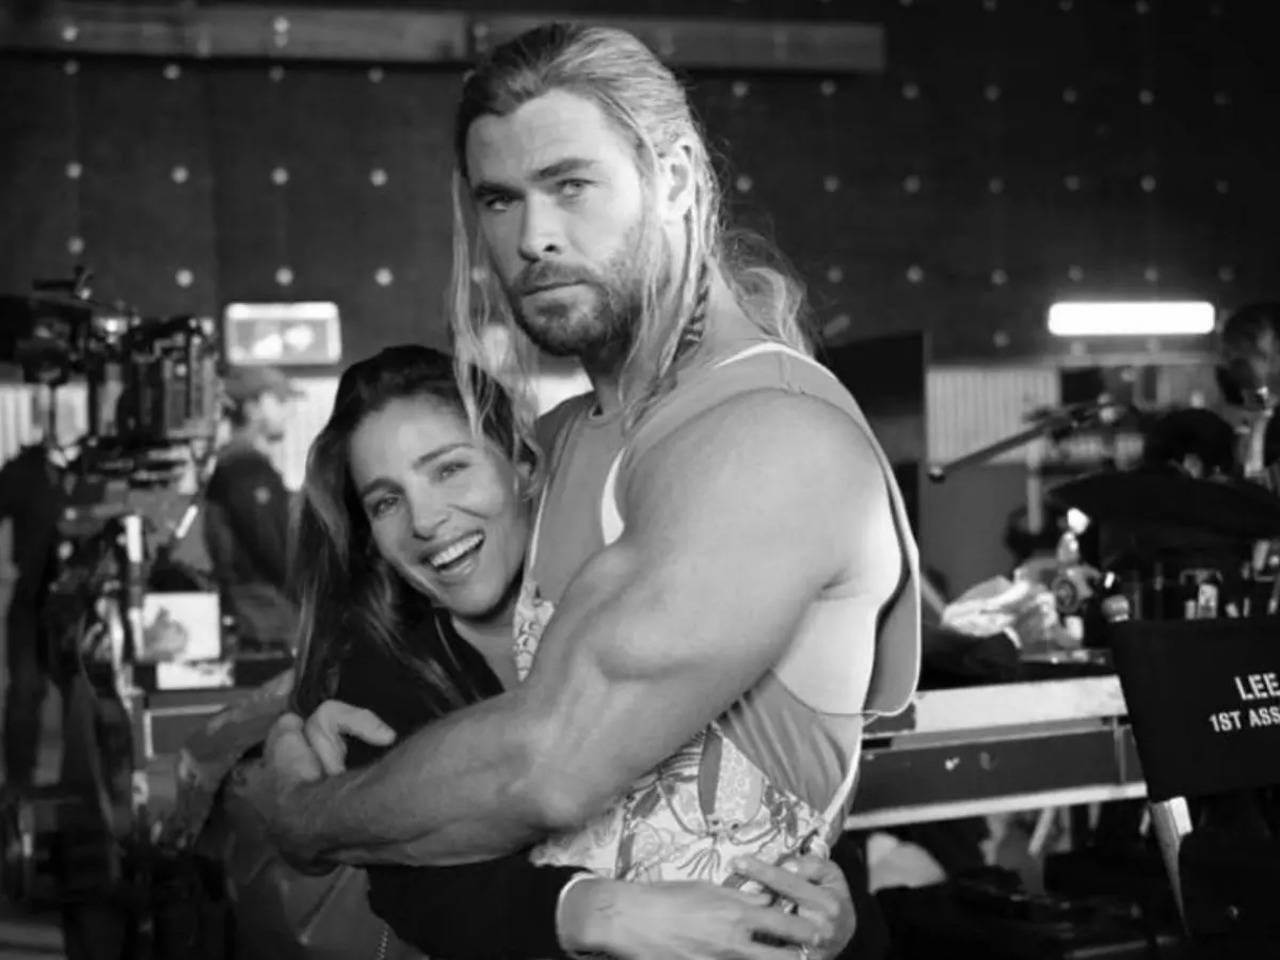 Chris Hemsworth's odds of acquiring Alzheimer's are high - Los